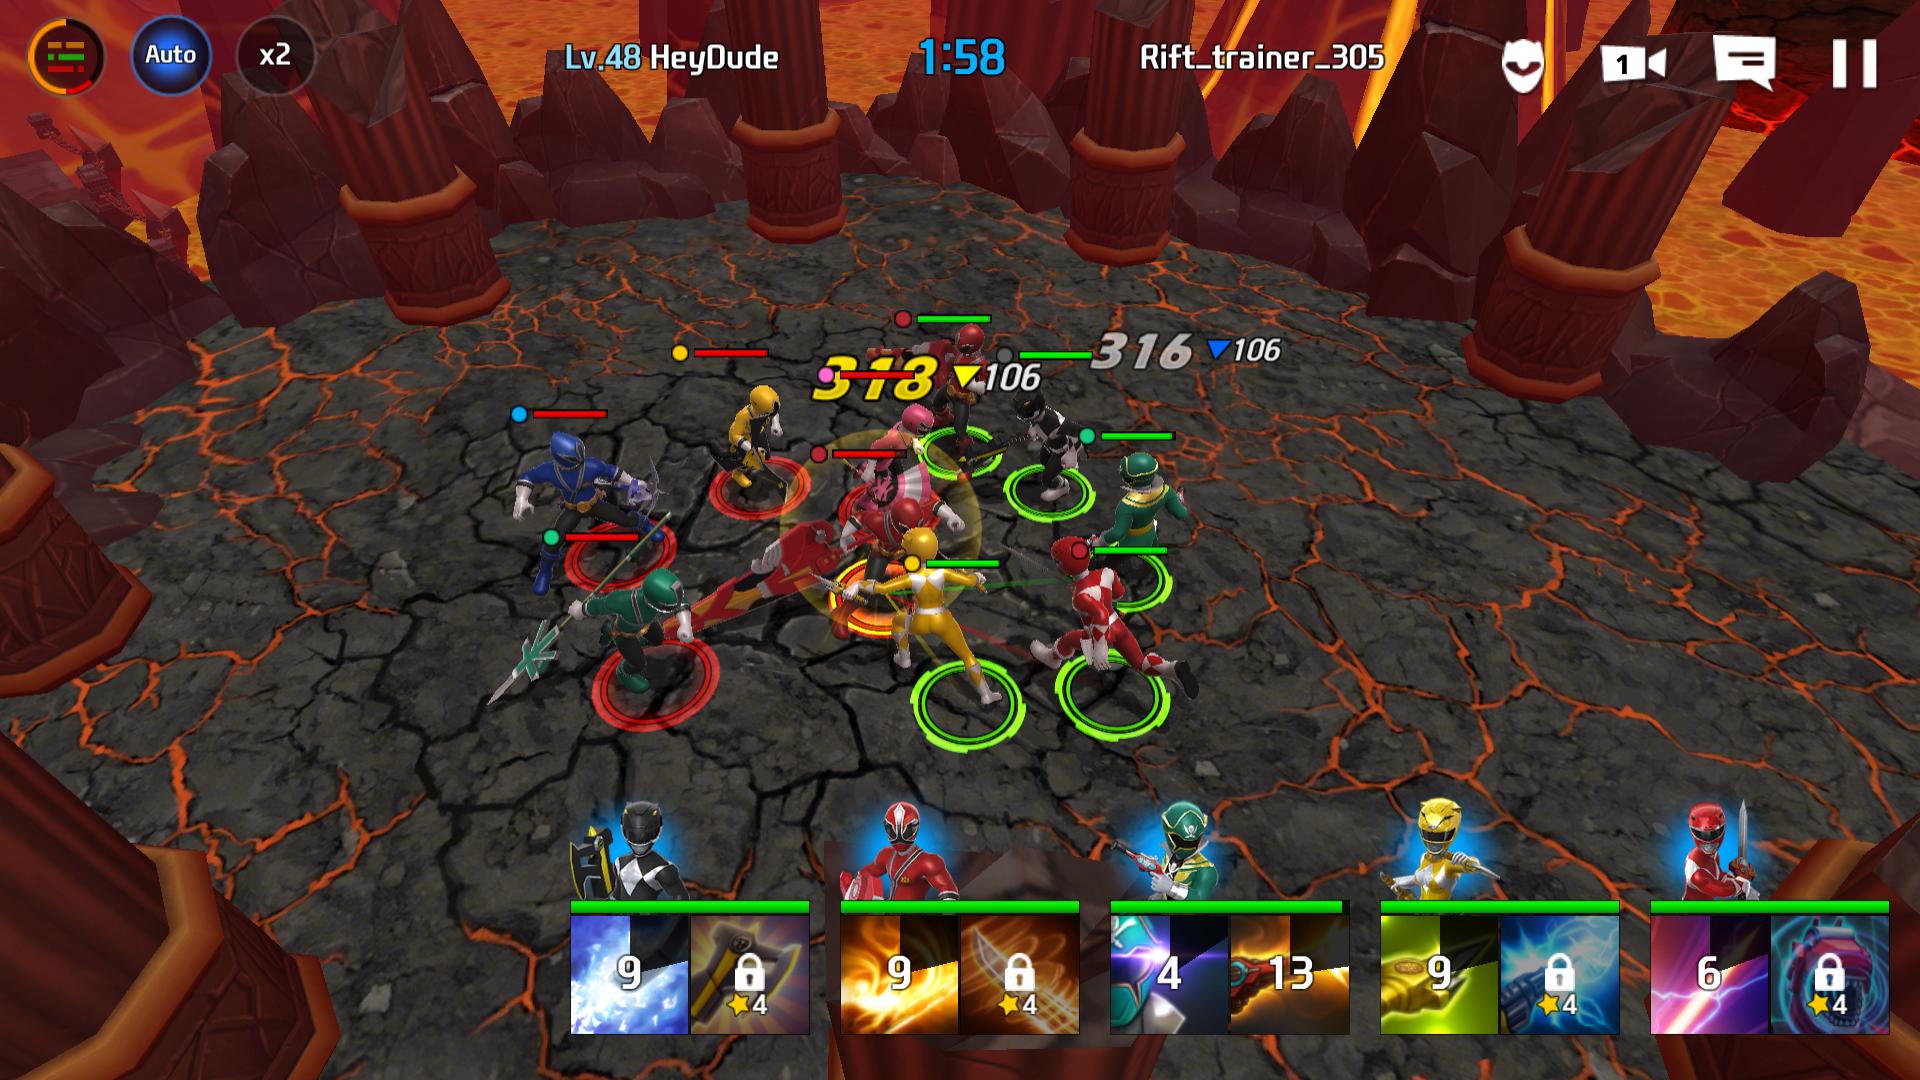 Power Rangers: All Stars for Android - APK Download